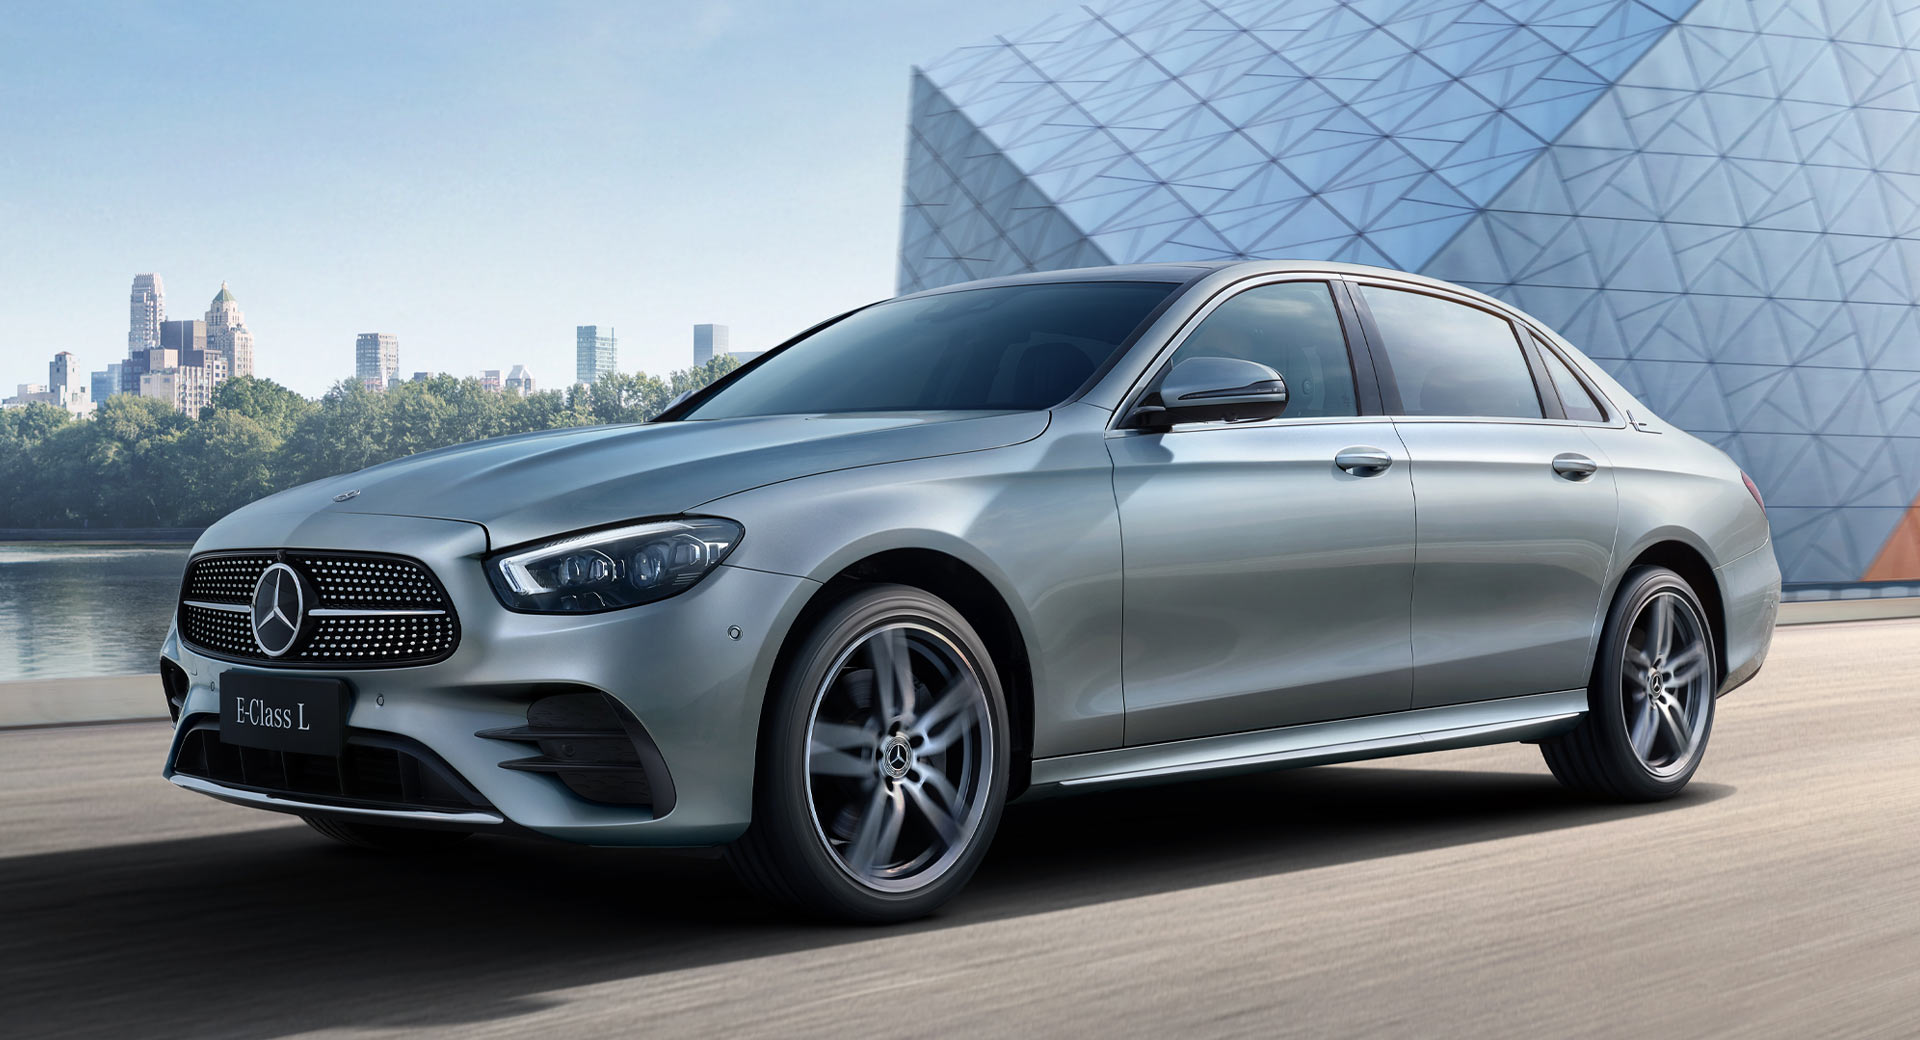 21 Mercedes E Class L Gets Updated Looks And New Tech Carscoops